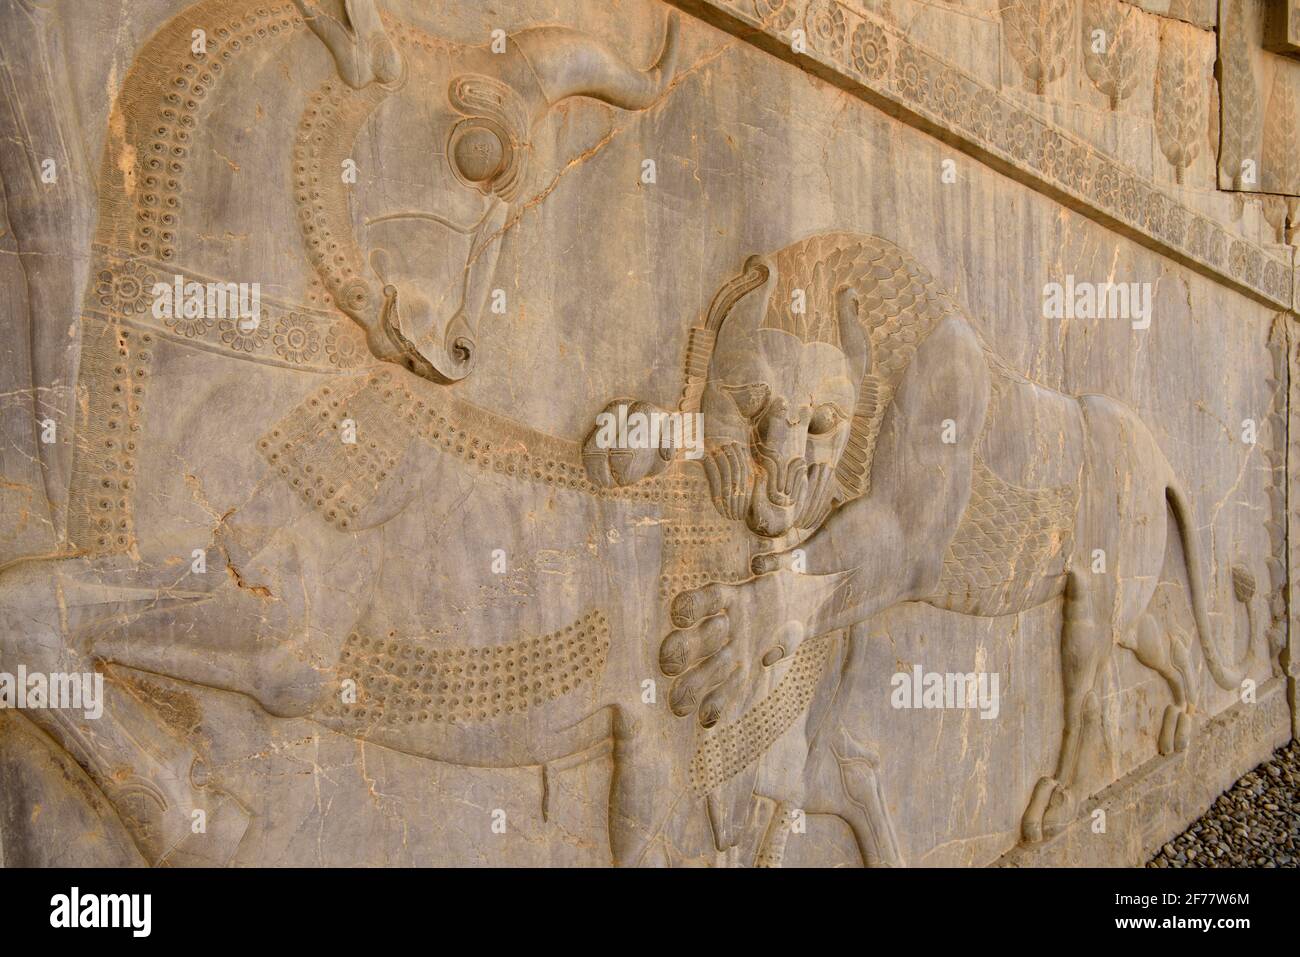 Iran, Persepolis, listed as World Heritage by UNESCO, Apadana eastern stairs, Bas relief of a lion attacking a bull The lion bull combat is argued to represent the perpetual cycle of day and night, with the lion representing the sun and the bull the night. It is also seen as a symbolic representation of astronomical and seasonal events like Nowruz, the iranian New year Stock Photo